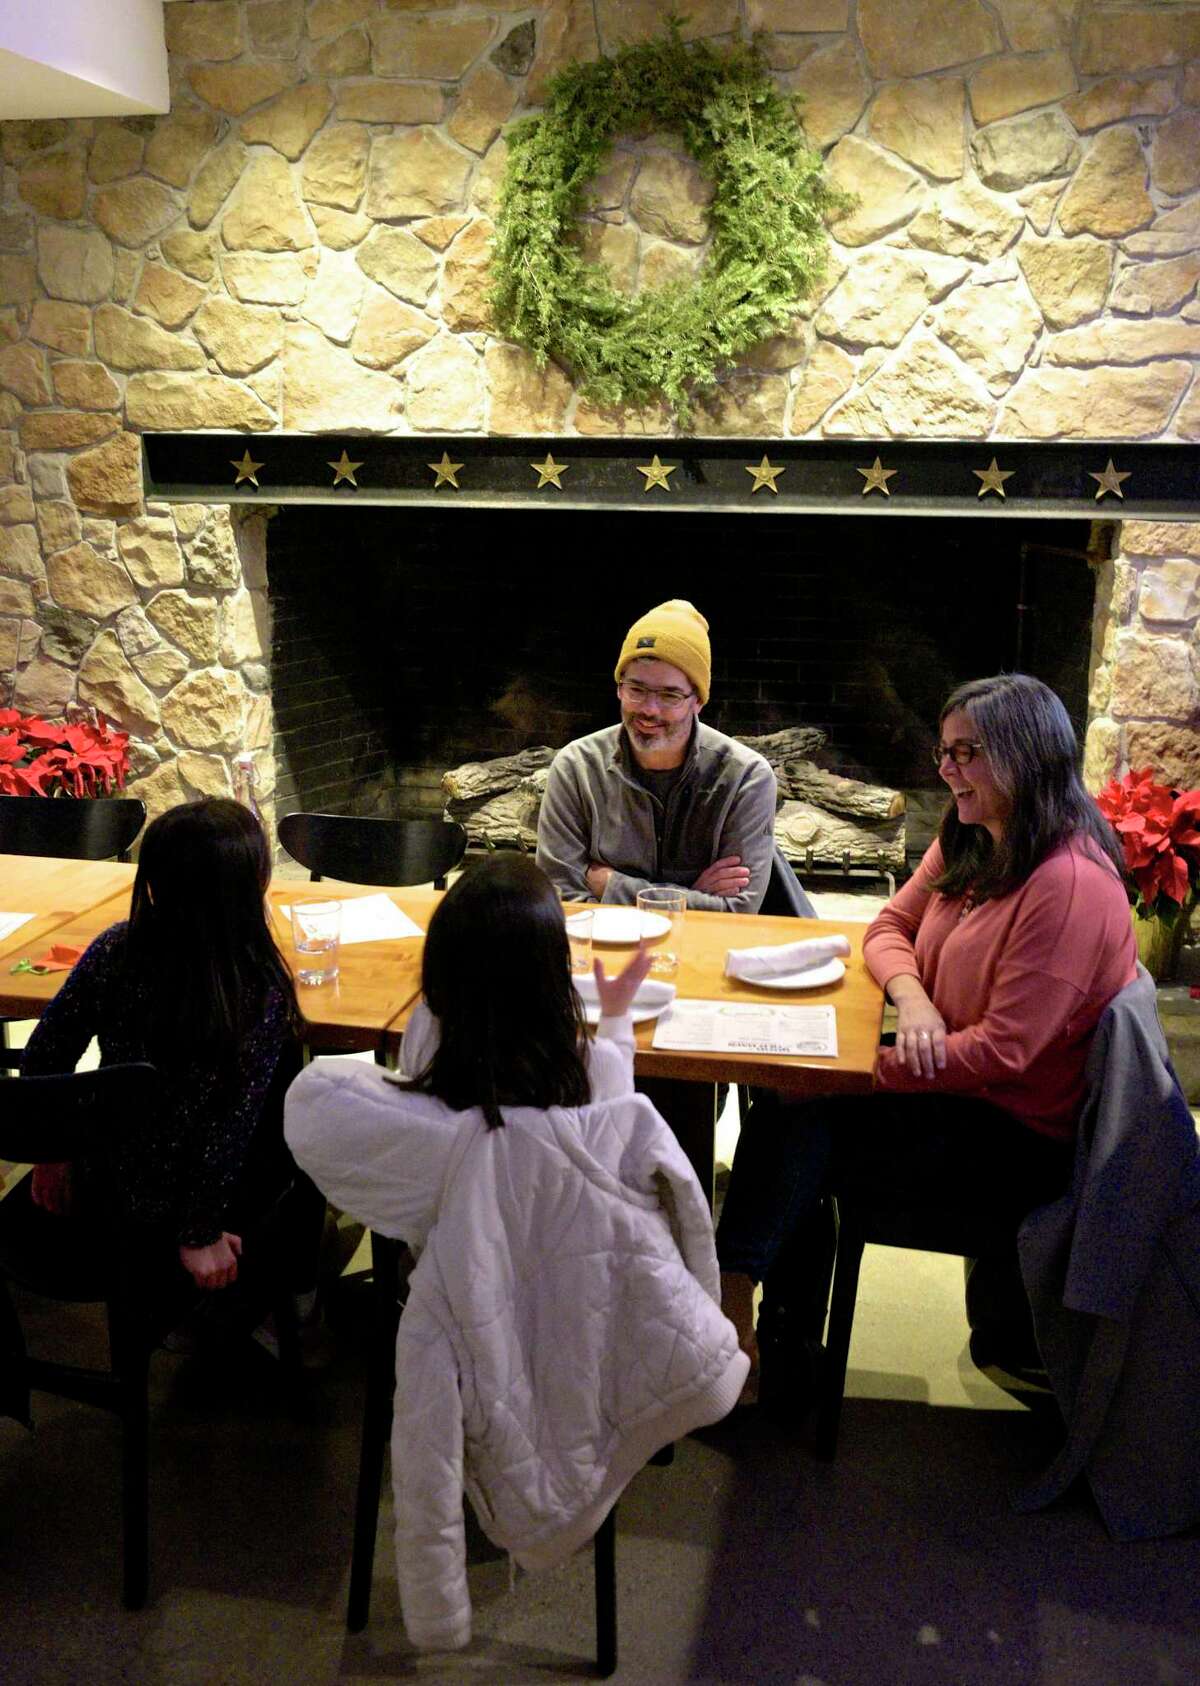 The Kakos family of Danbury, Holland, 6, left, Maryn, 8, Gary and Alaina are at Good Old Days Pizzeria and Cocktail Den, in the lower level of Marygold's on Main, on its opening night, Wednesday, December 30, 2020, in Newtown. Conn. they said they follow Matt, pizza guy Matteo Stanz, on Instagram and go wherever he's cooking.